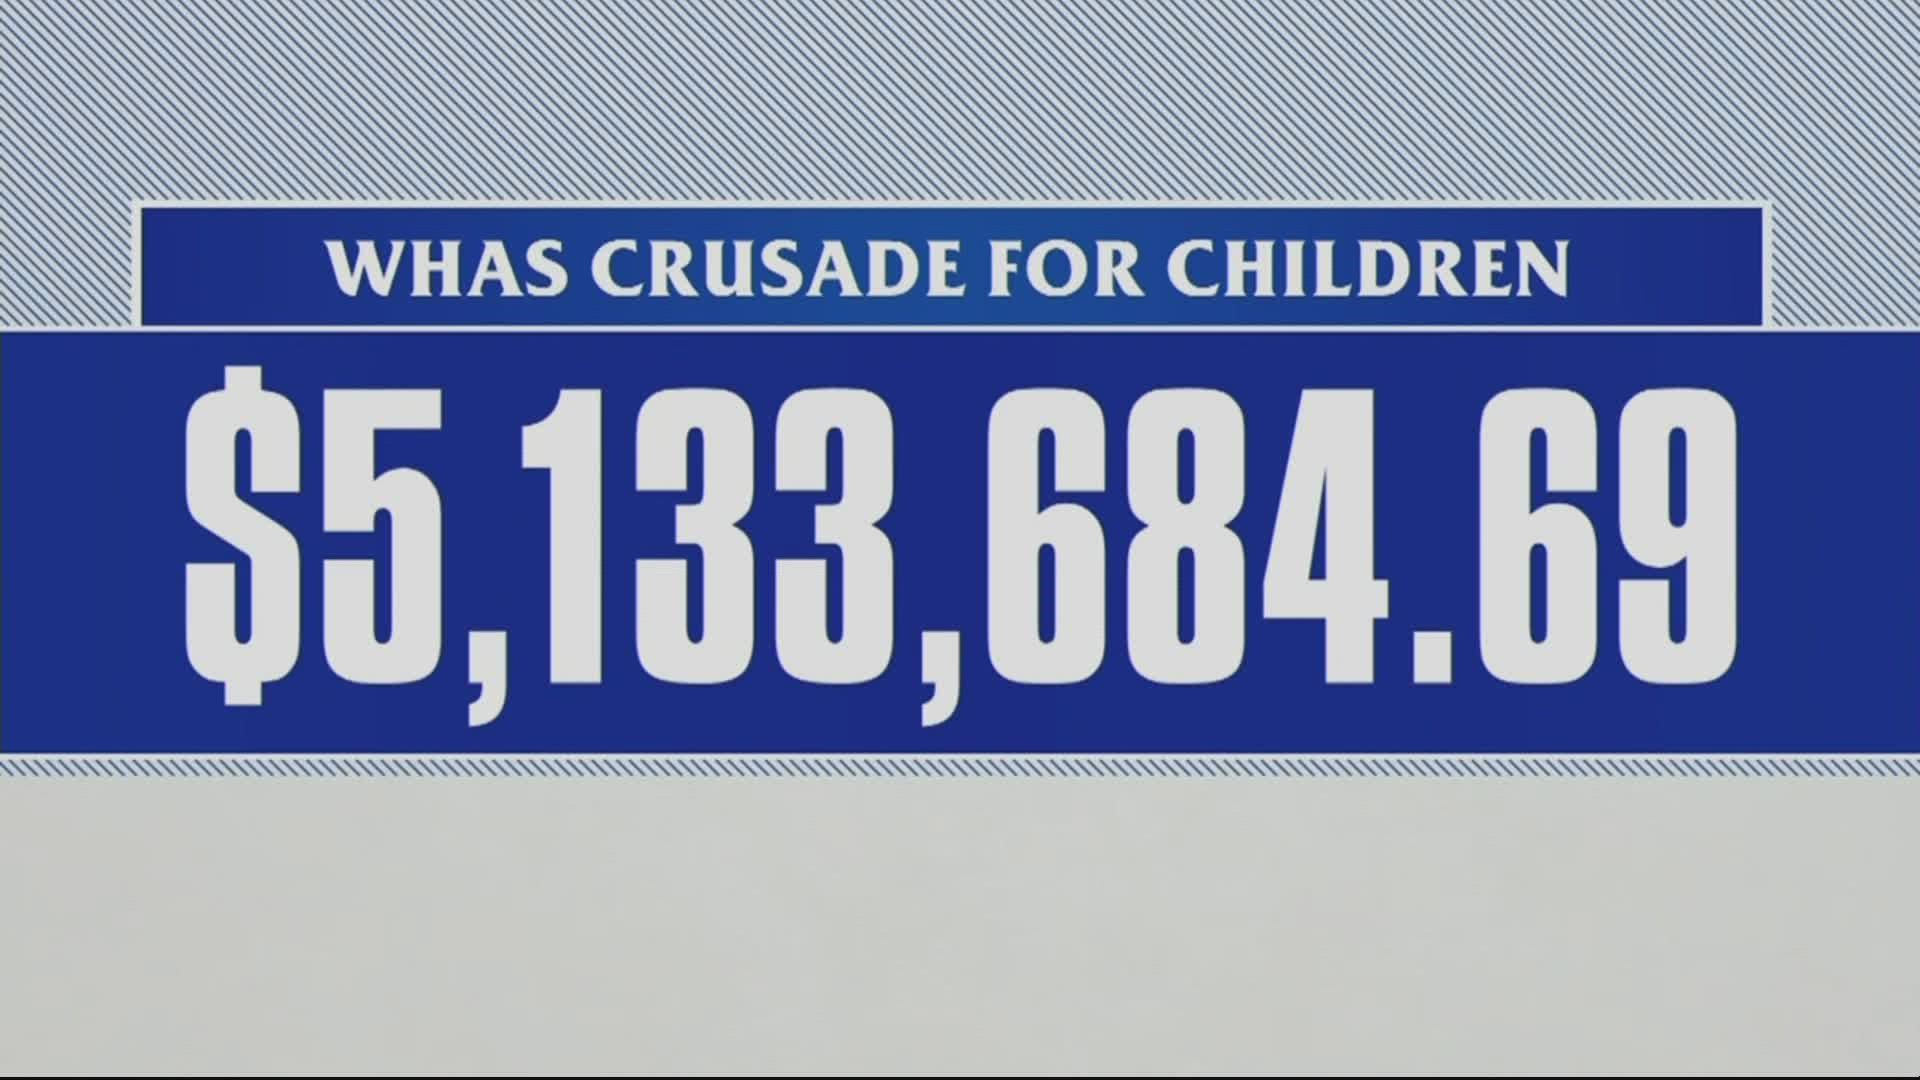 This year's WHAS Crusade for Children raised $5,133,684.69 during the two-day telethon.